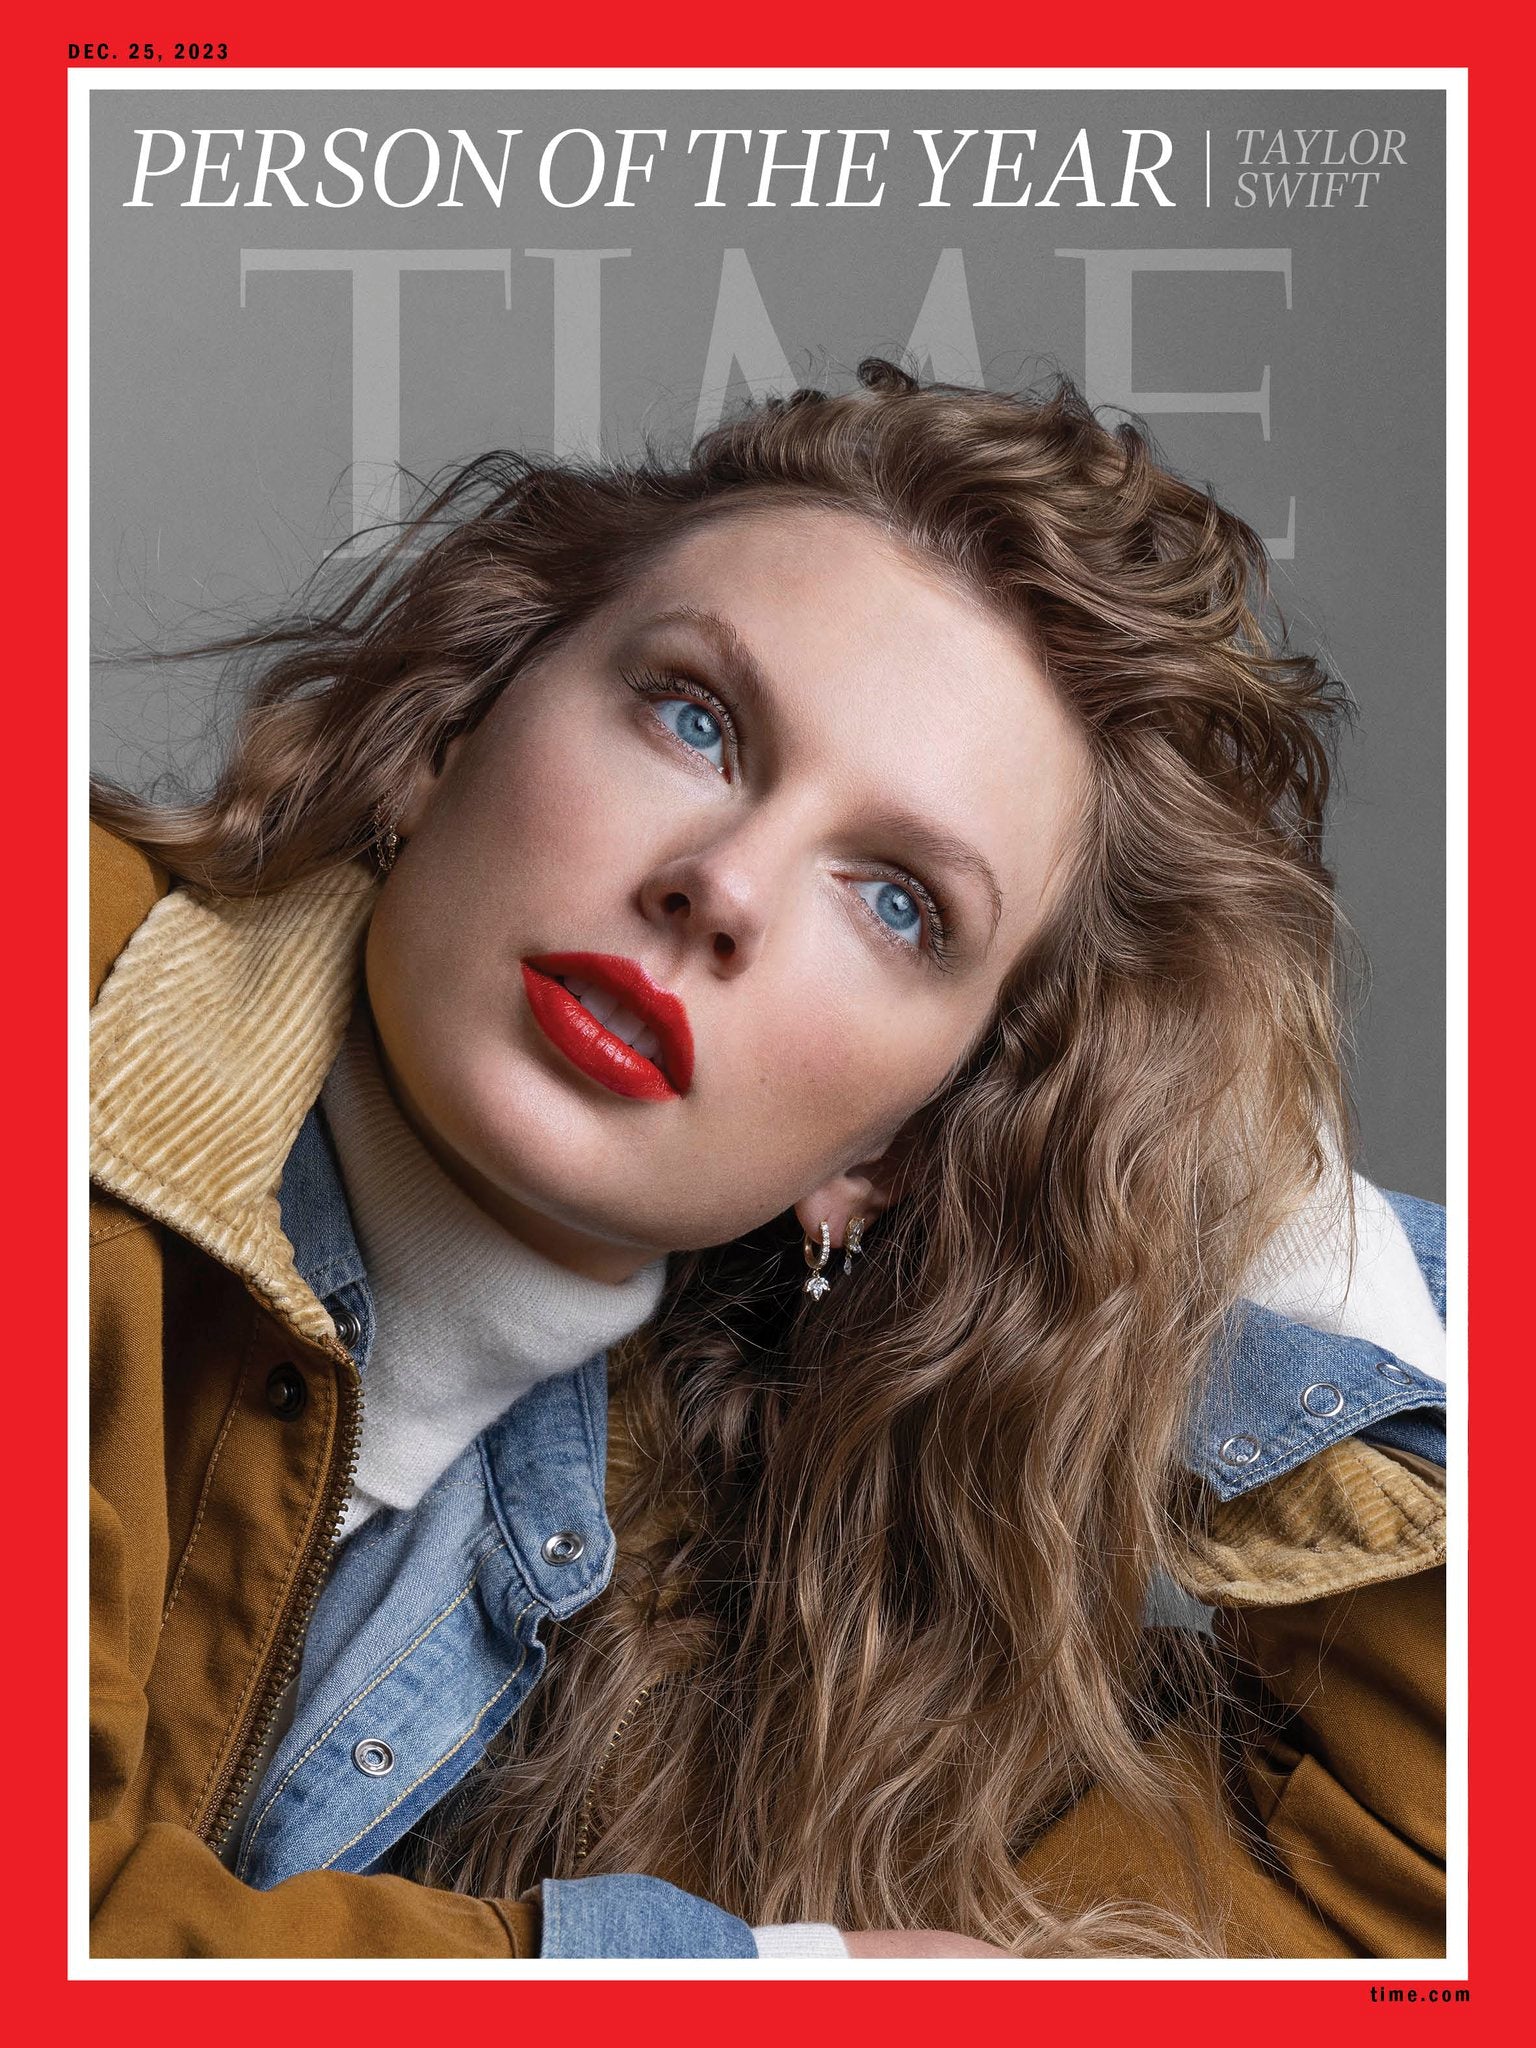 Taylor Swift photos from Time Person of the Year 2023 covers are art